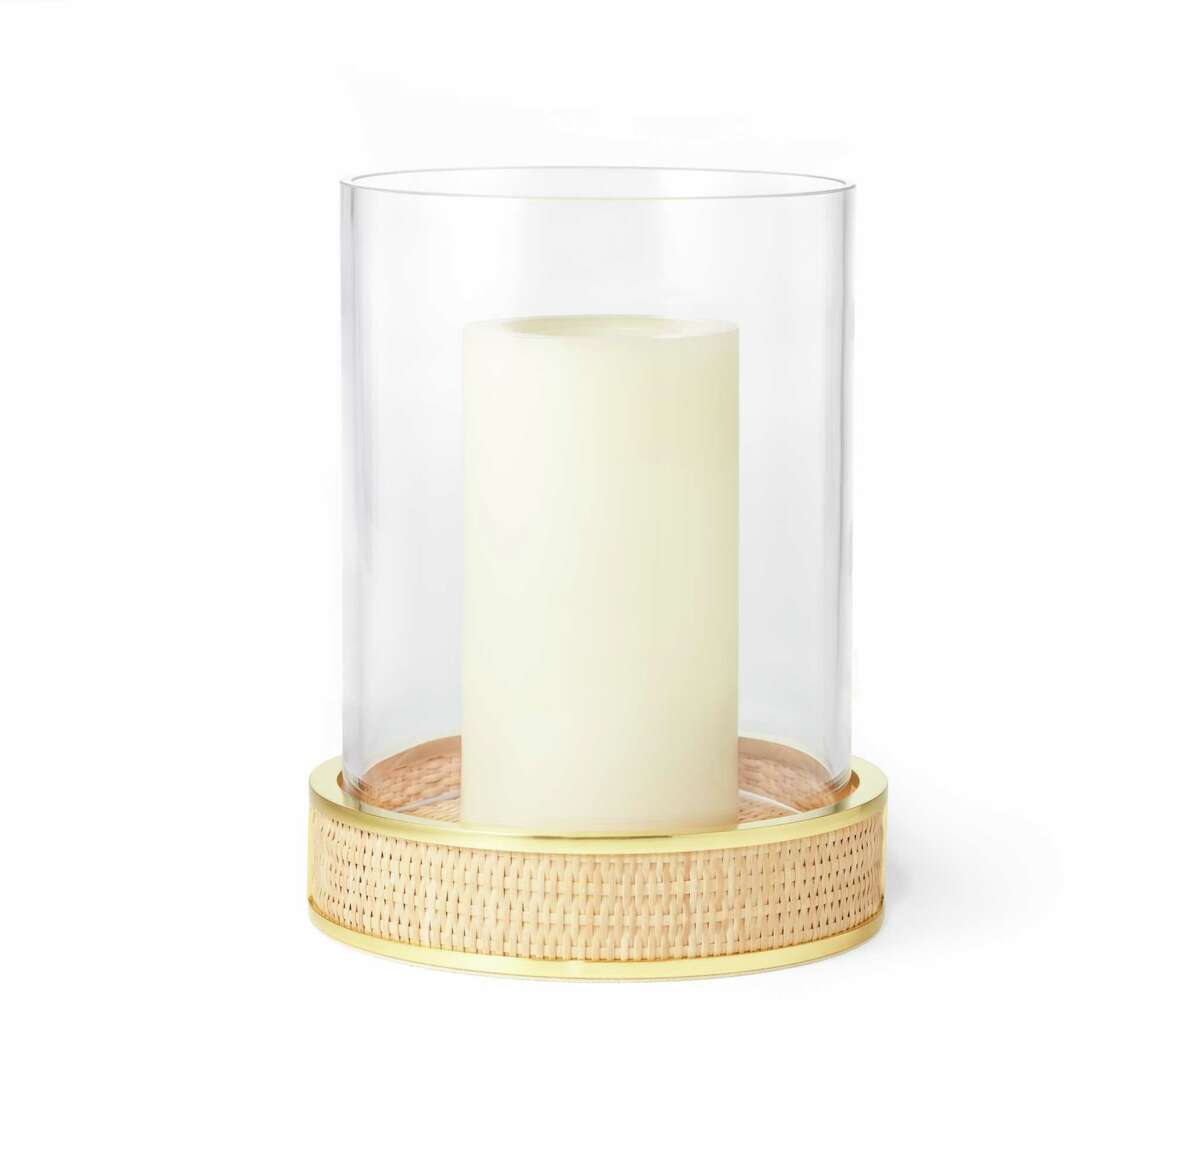 Colette Hurricane Lamp:Â Bring out Aerin?s Colette Cane hurricane lamp for summer entertaining, or keep it busy year-round in your beach house. The eight-inch-tall glass vase rests in a stylish base of woven cane and brass. $375; www.aerin.com